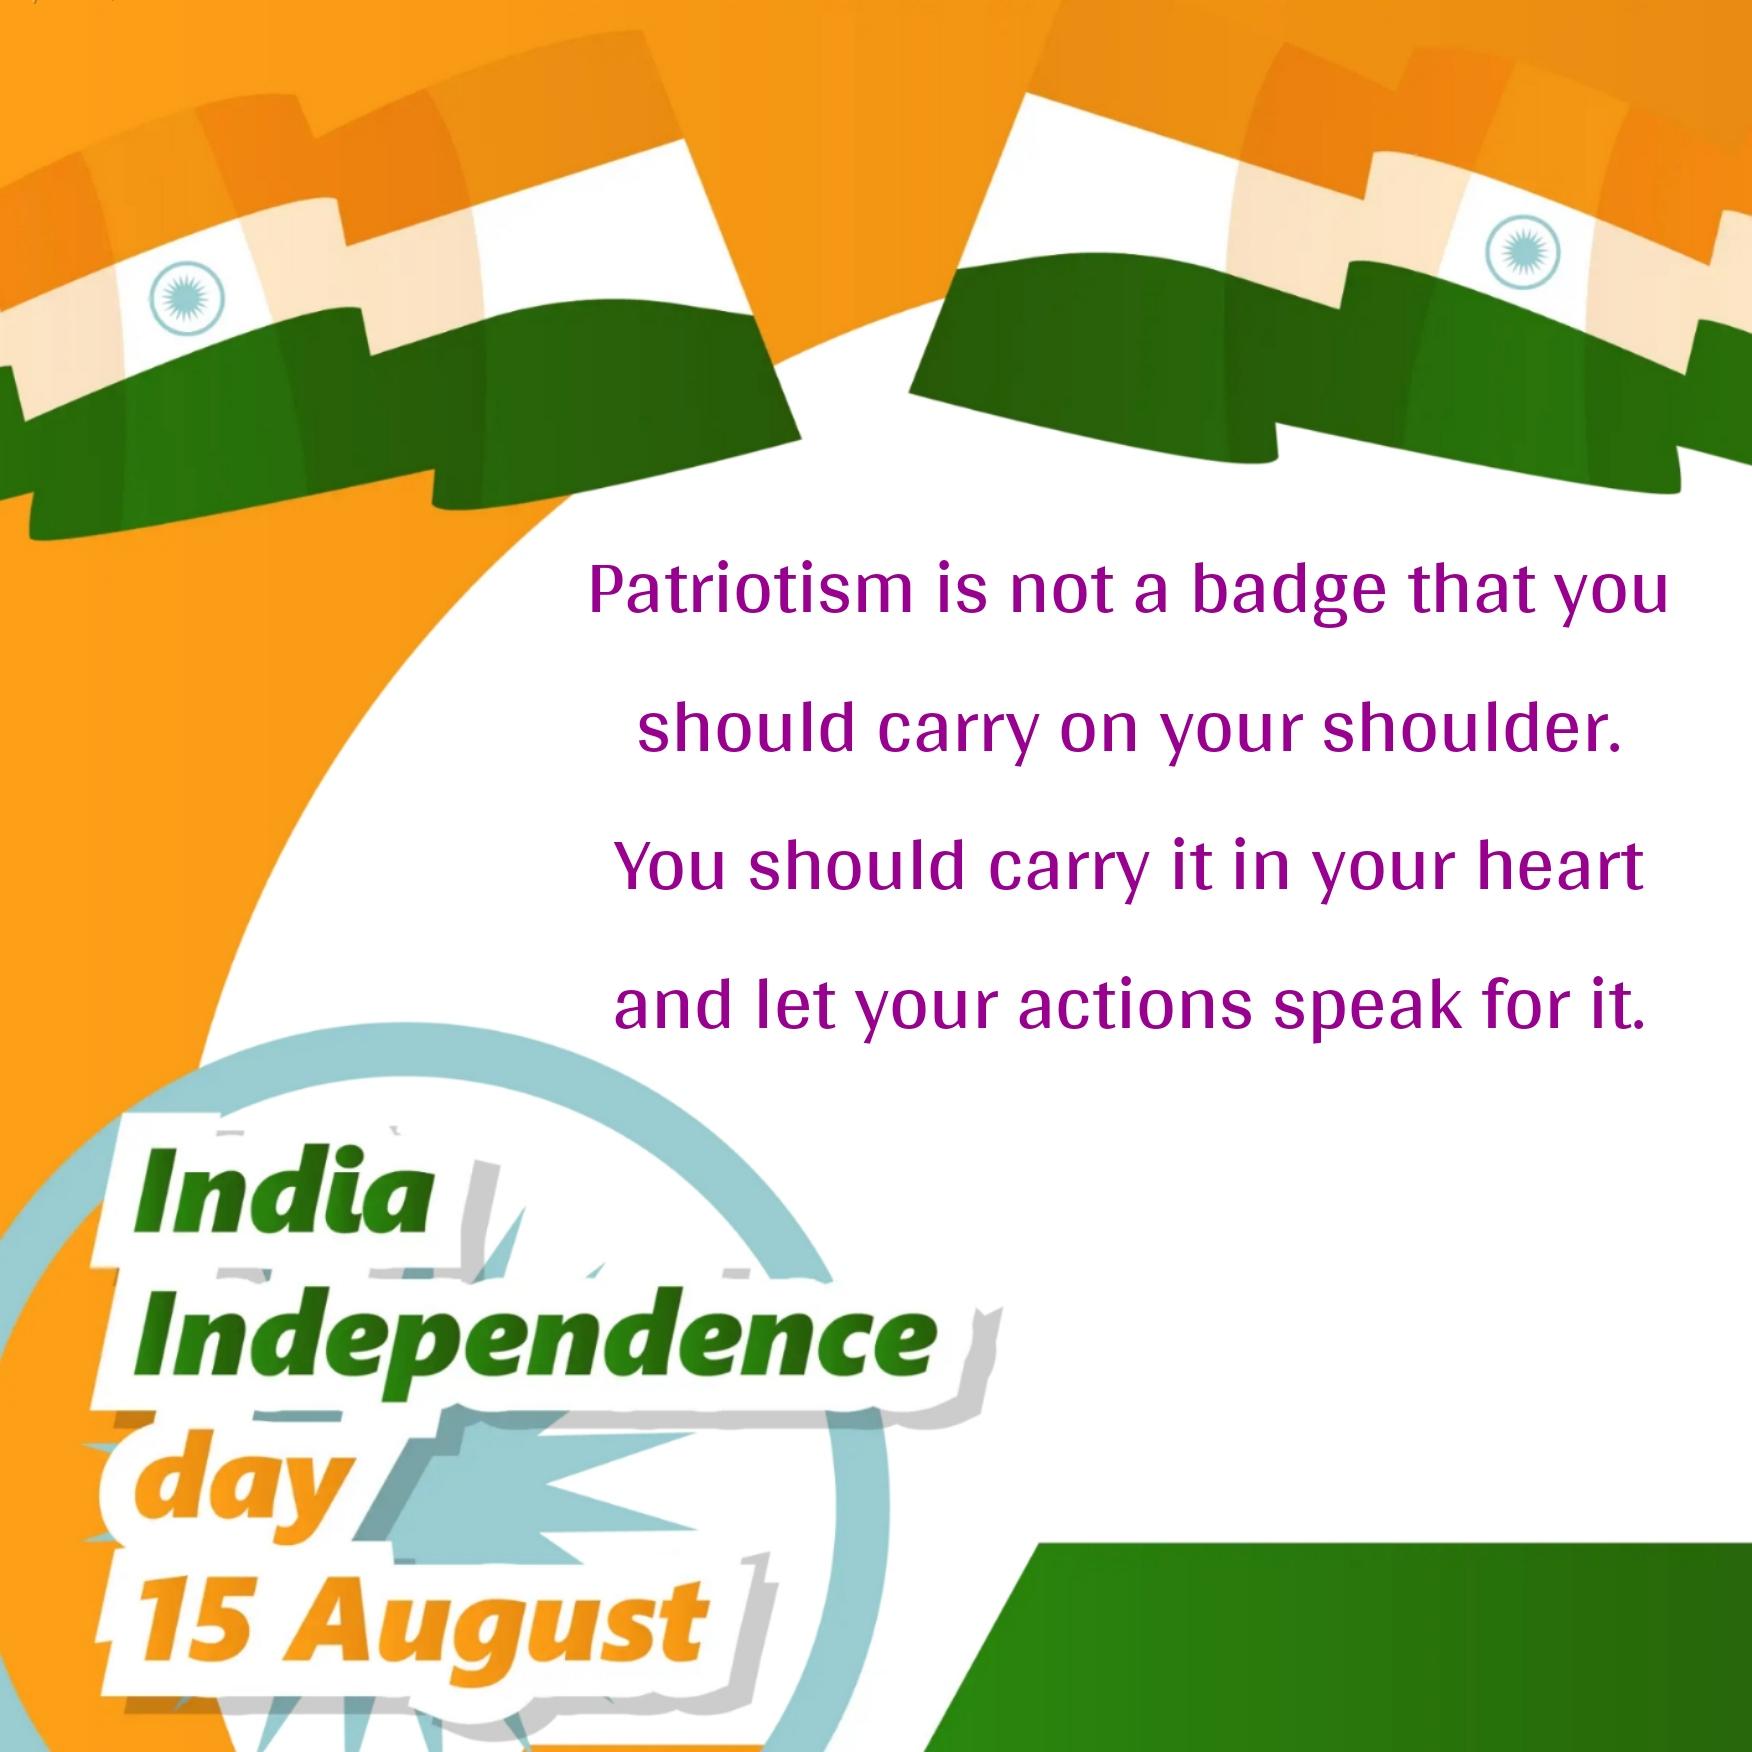 Patriotism is not a badge that you should carry on your shoulder